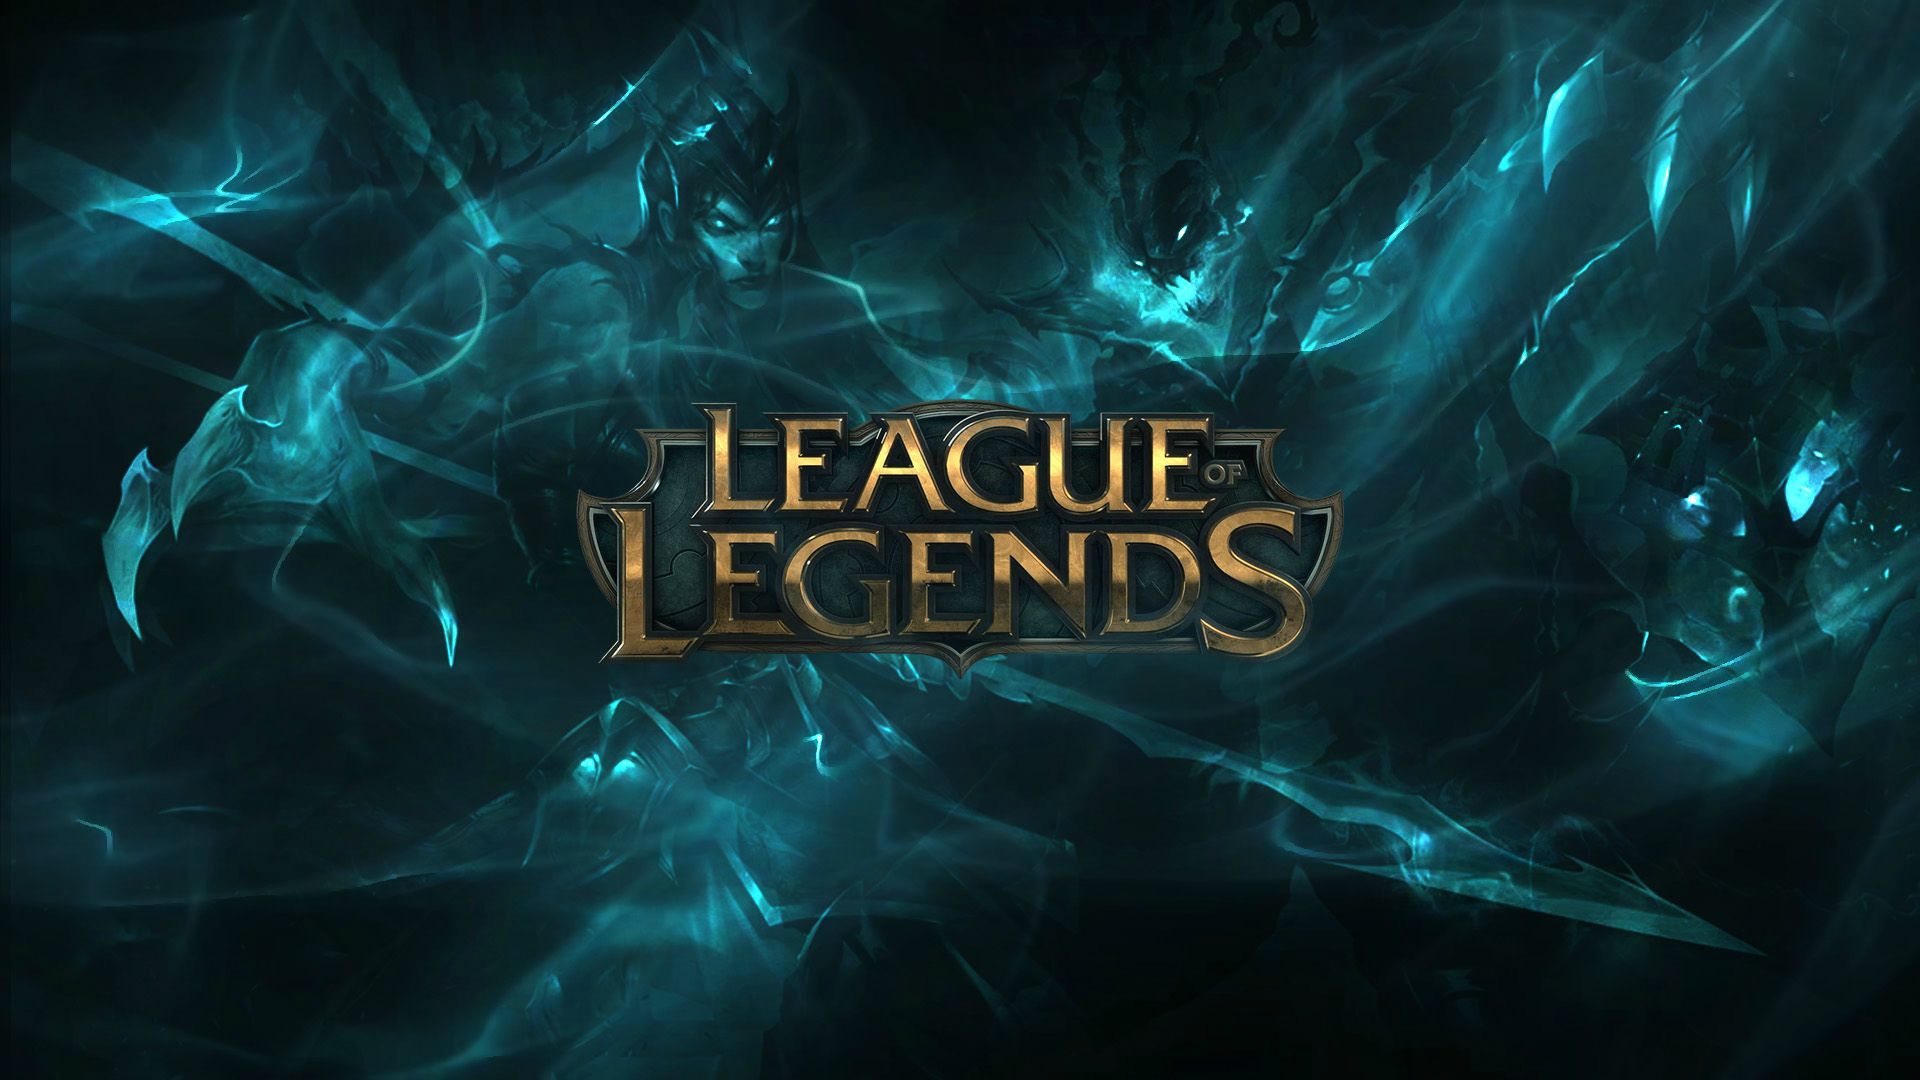 Tapety na sezon 6 League of Legends1920 x 1080